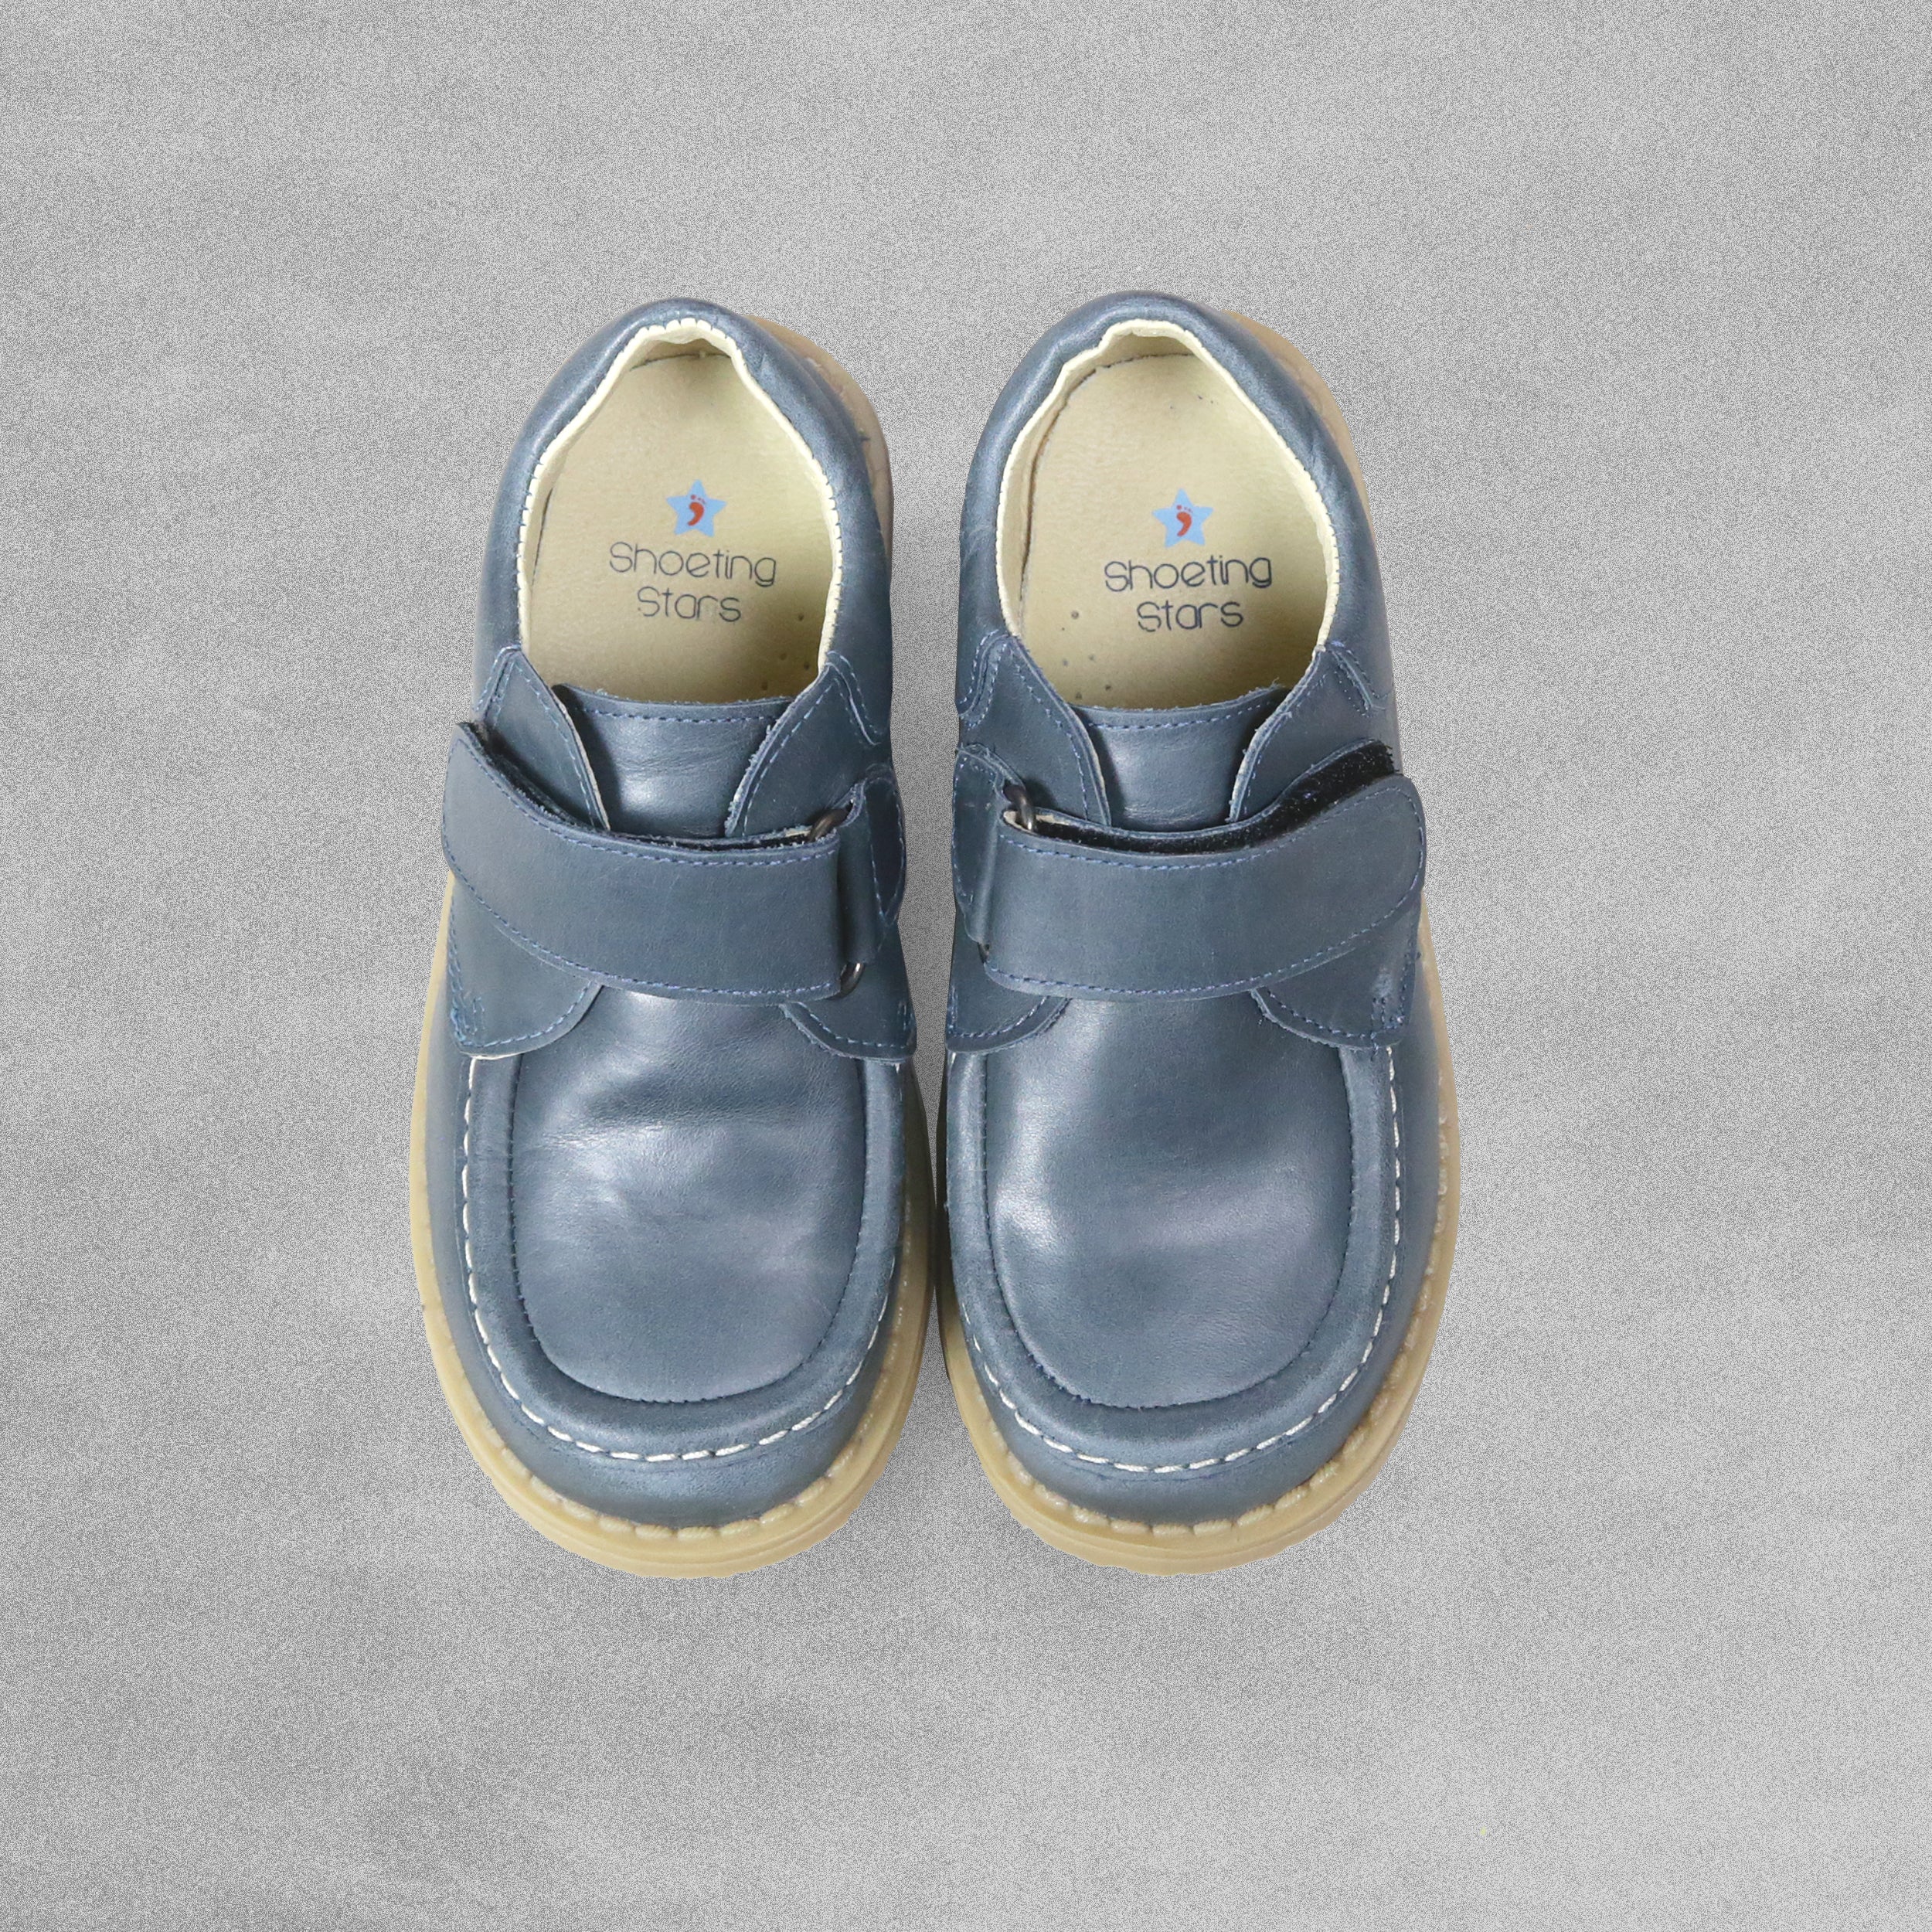 Shoeting Stars Slate Blue Shoes with Velcro Strap